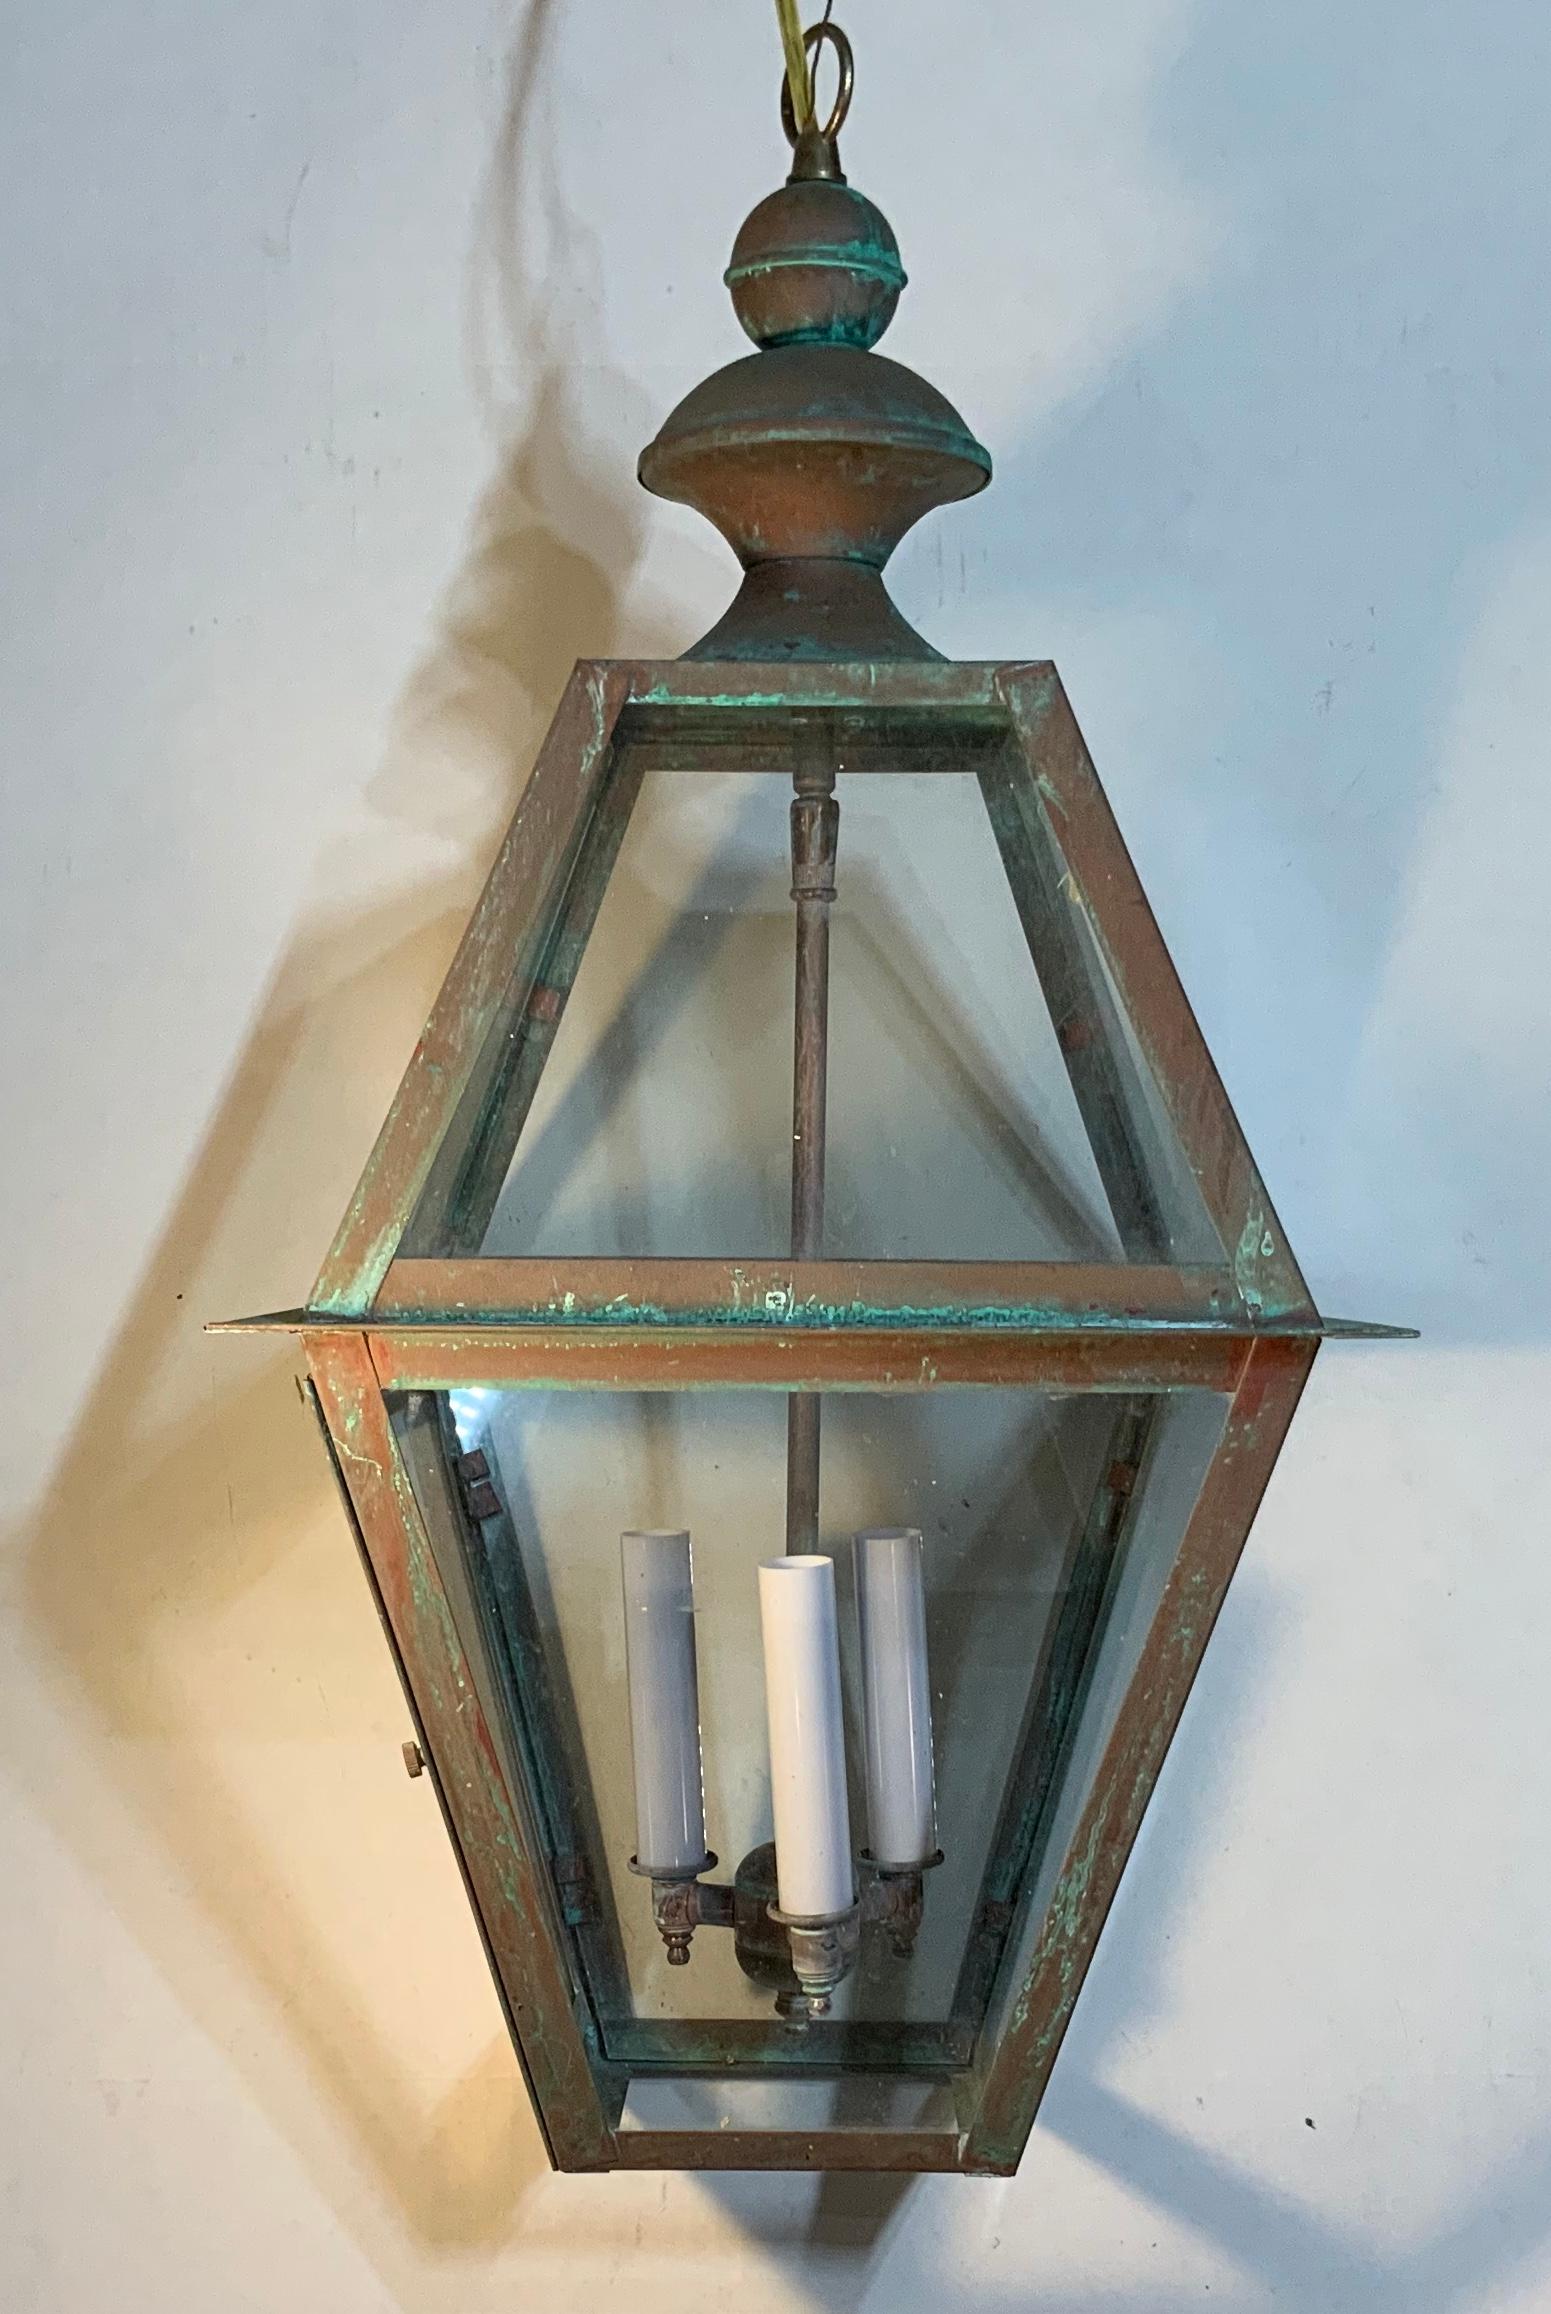 Quality handmade of copper lantern with three 60 watt lights.
Electrified and ready to light. Beautiful oxidization patina.
Made in the US and UL approved.
Could be used in wet location and inside.
Chain and canopy included.